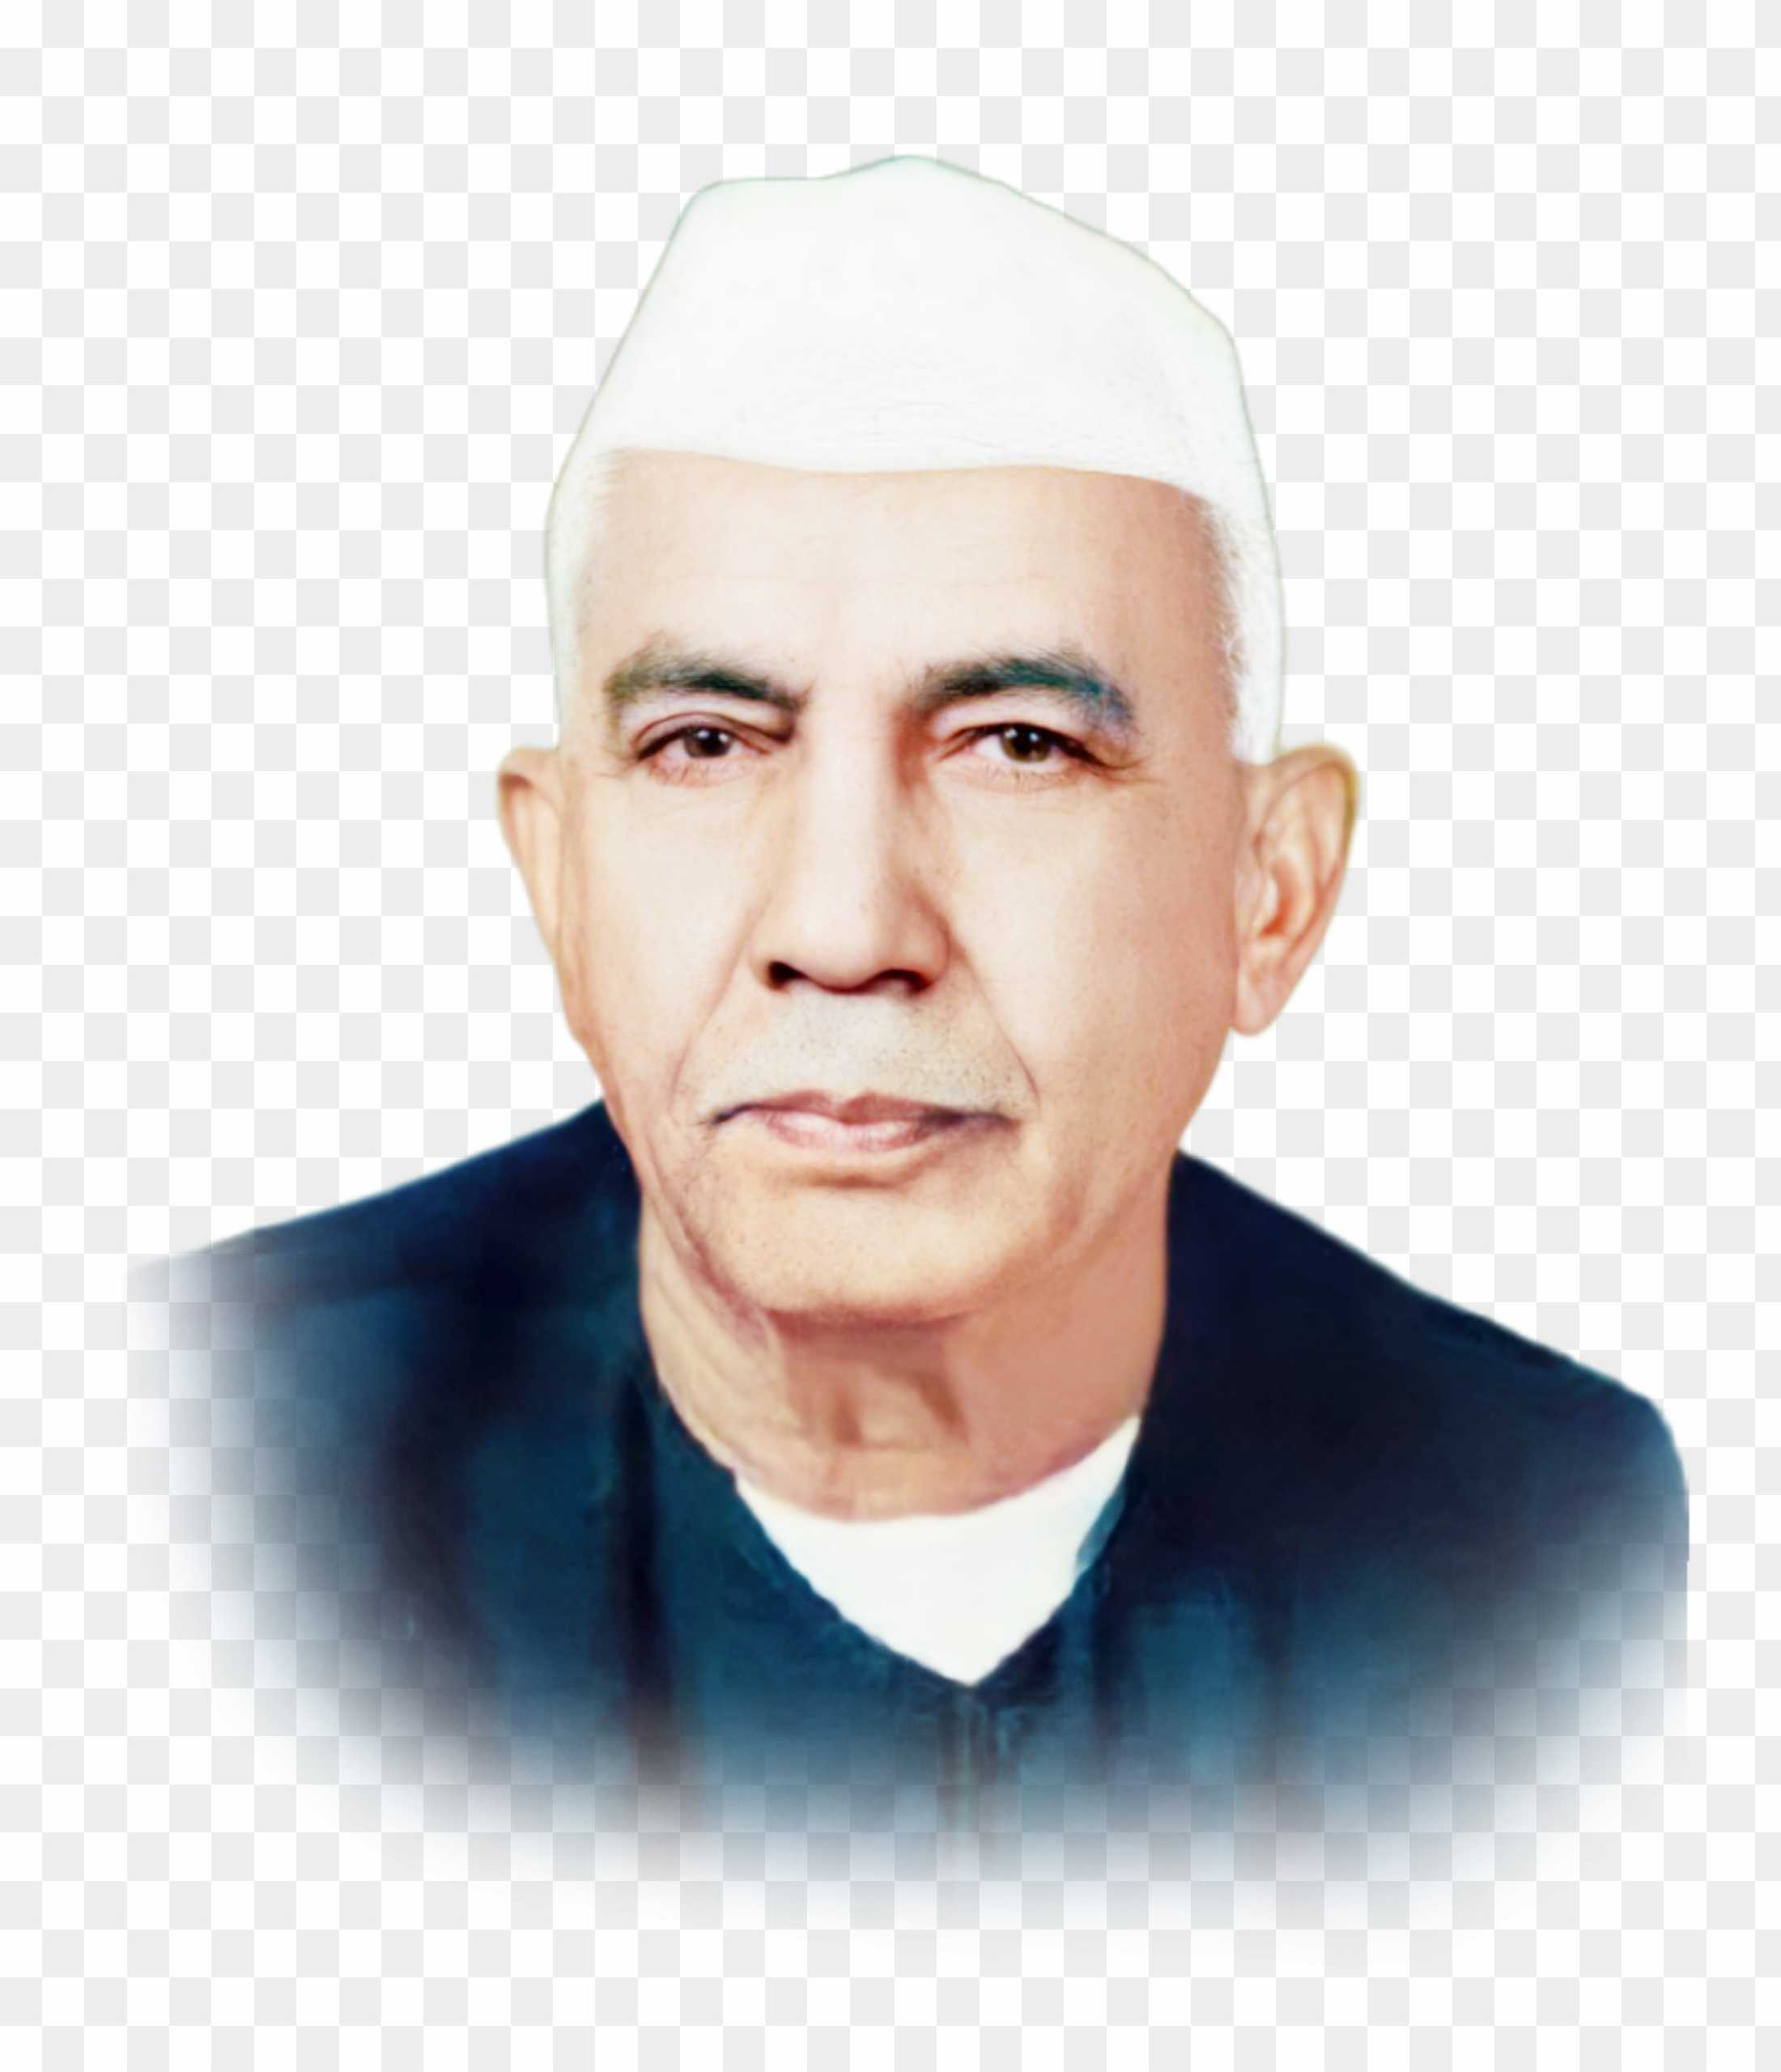 Chaudhary Charan Singh png images download